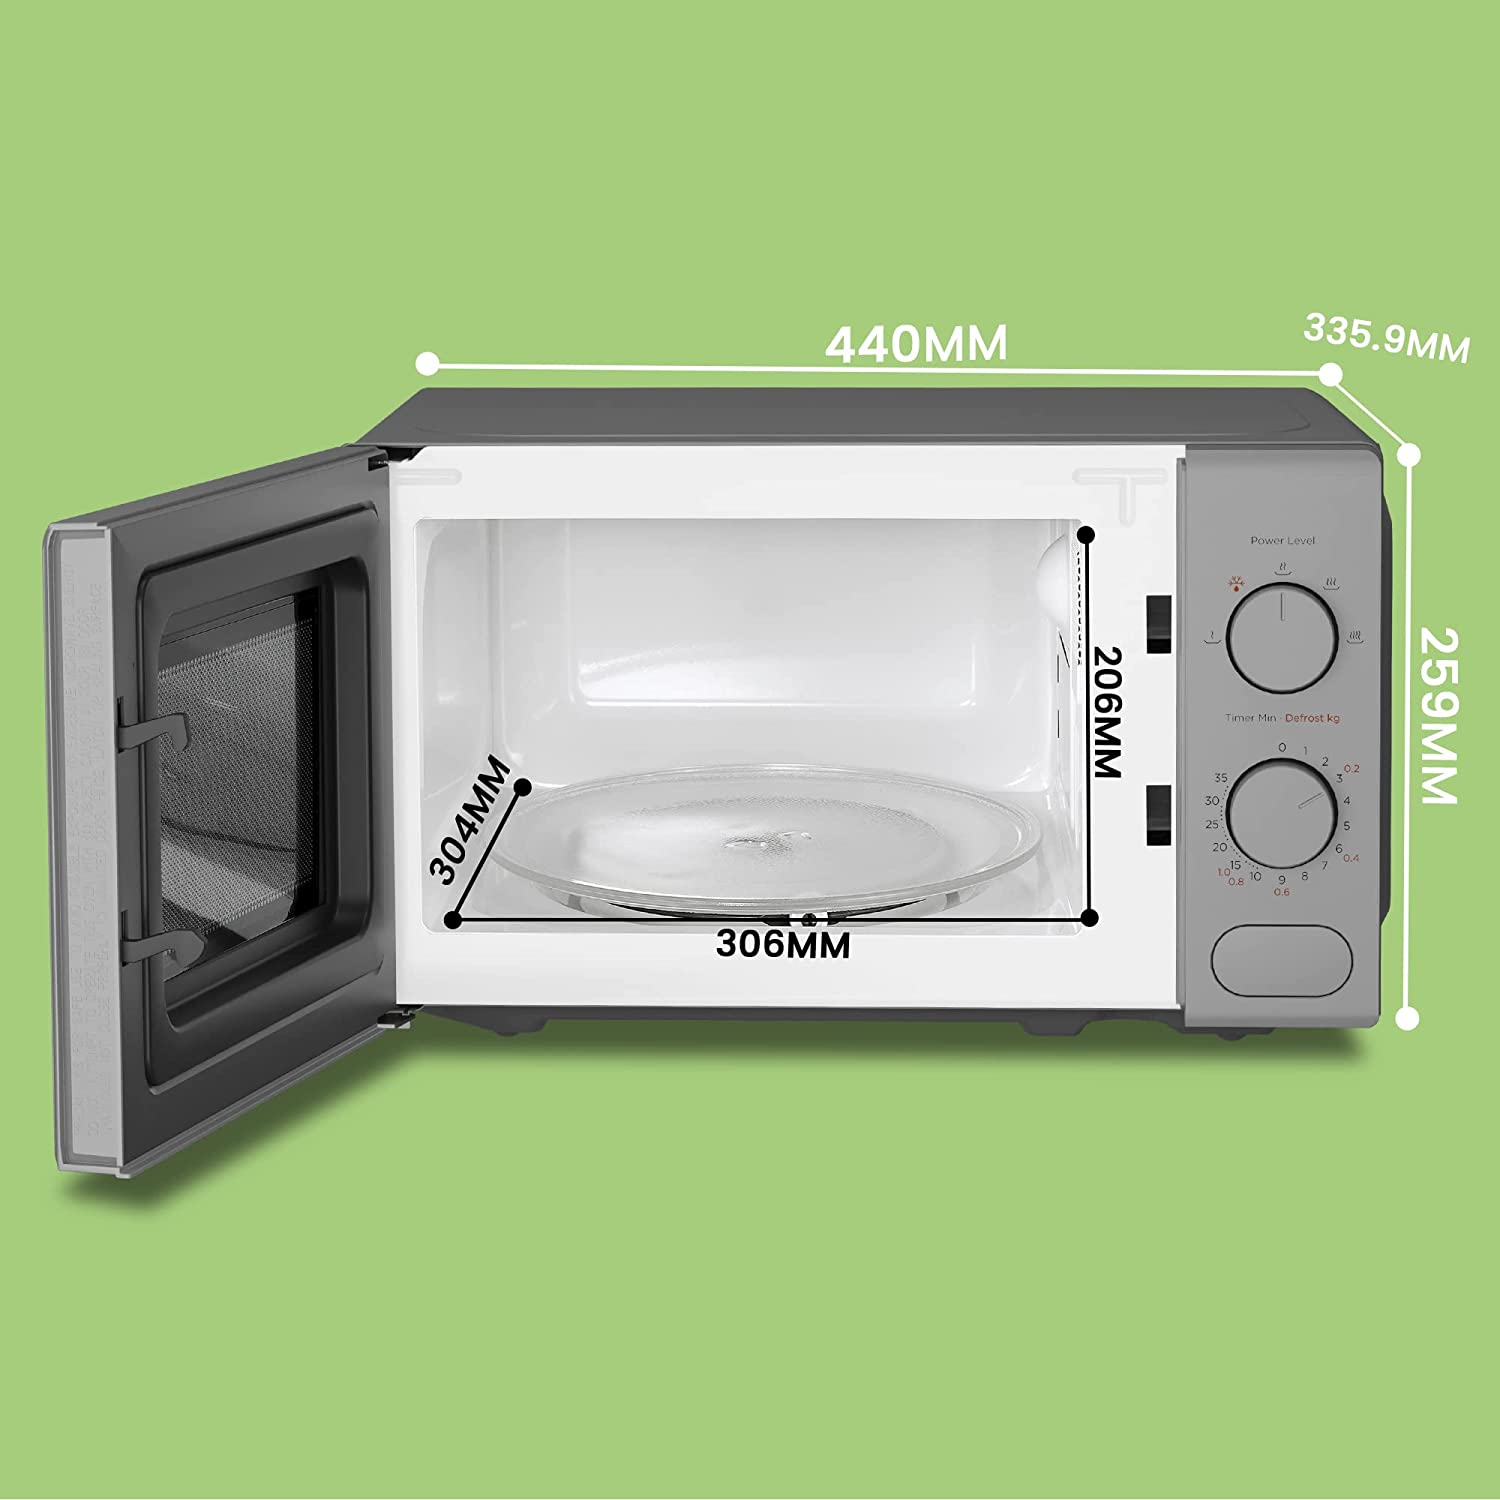 Comfee 20L Microwave Oven 700W Countertop Kitchen 8 Cooking Settings Green